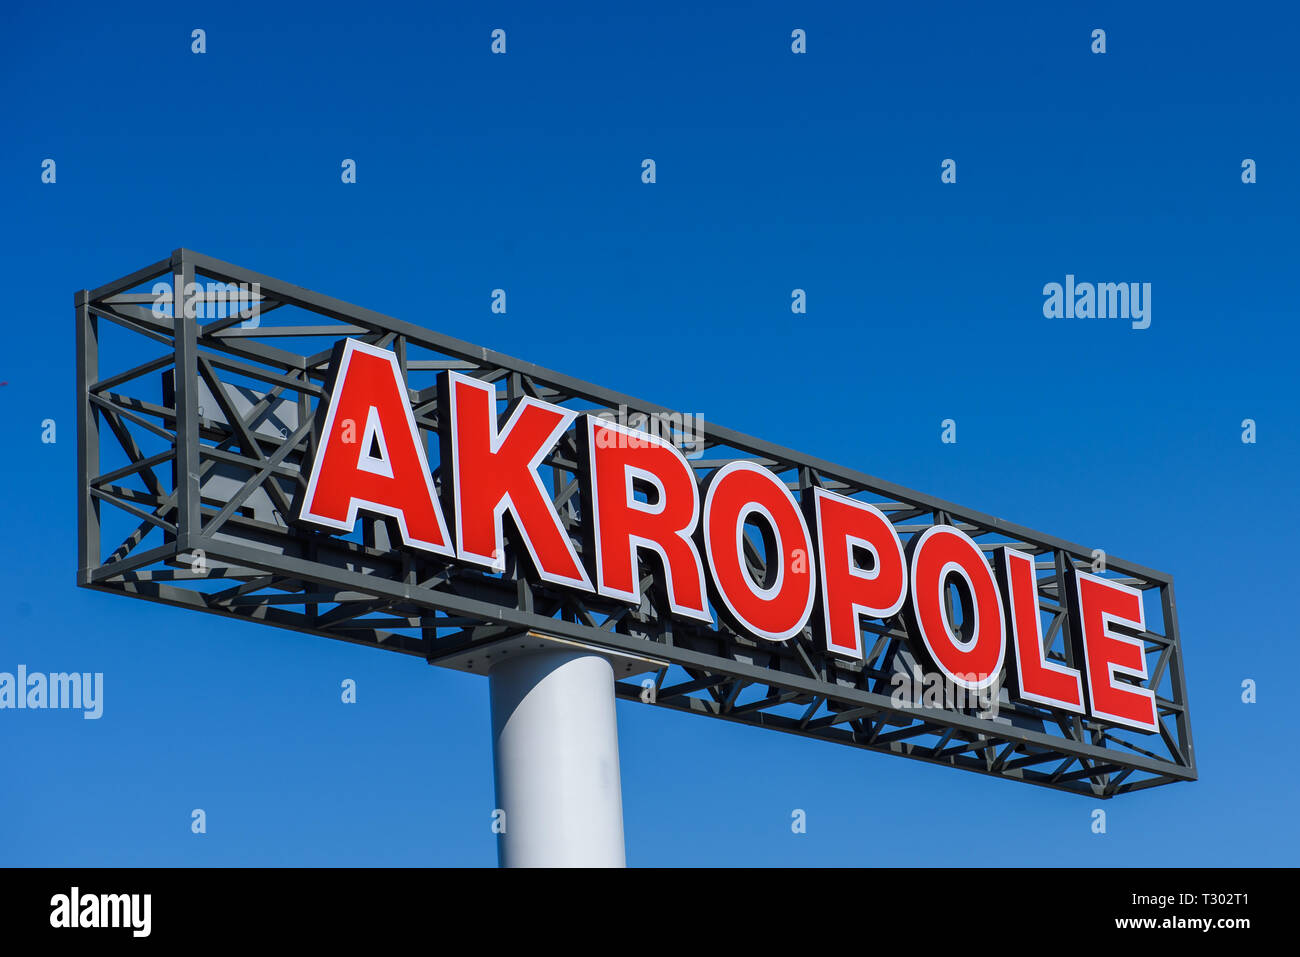 04.04.2019. RIGA, LATVIA. Official opening of biggest shopping centre Akropole in Latvia. The shopping mall is part of Akropolis Group - a Lithuanian  Stock Photo